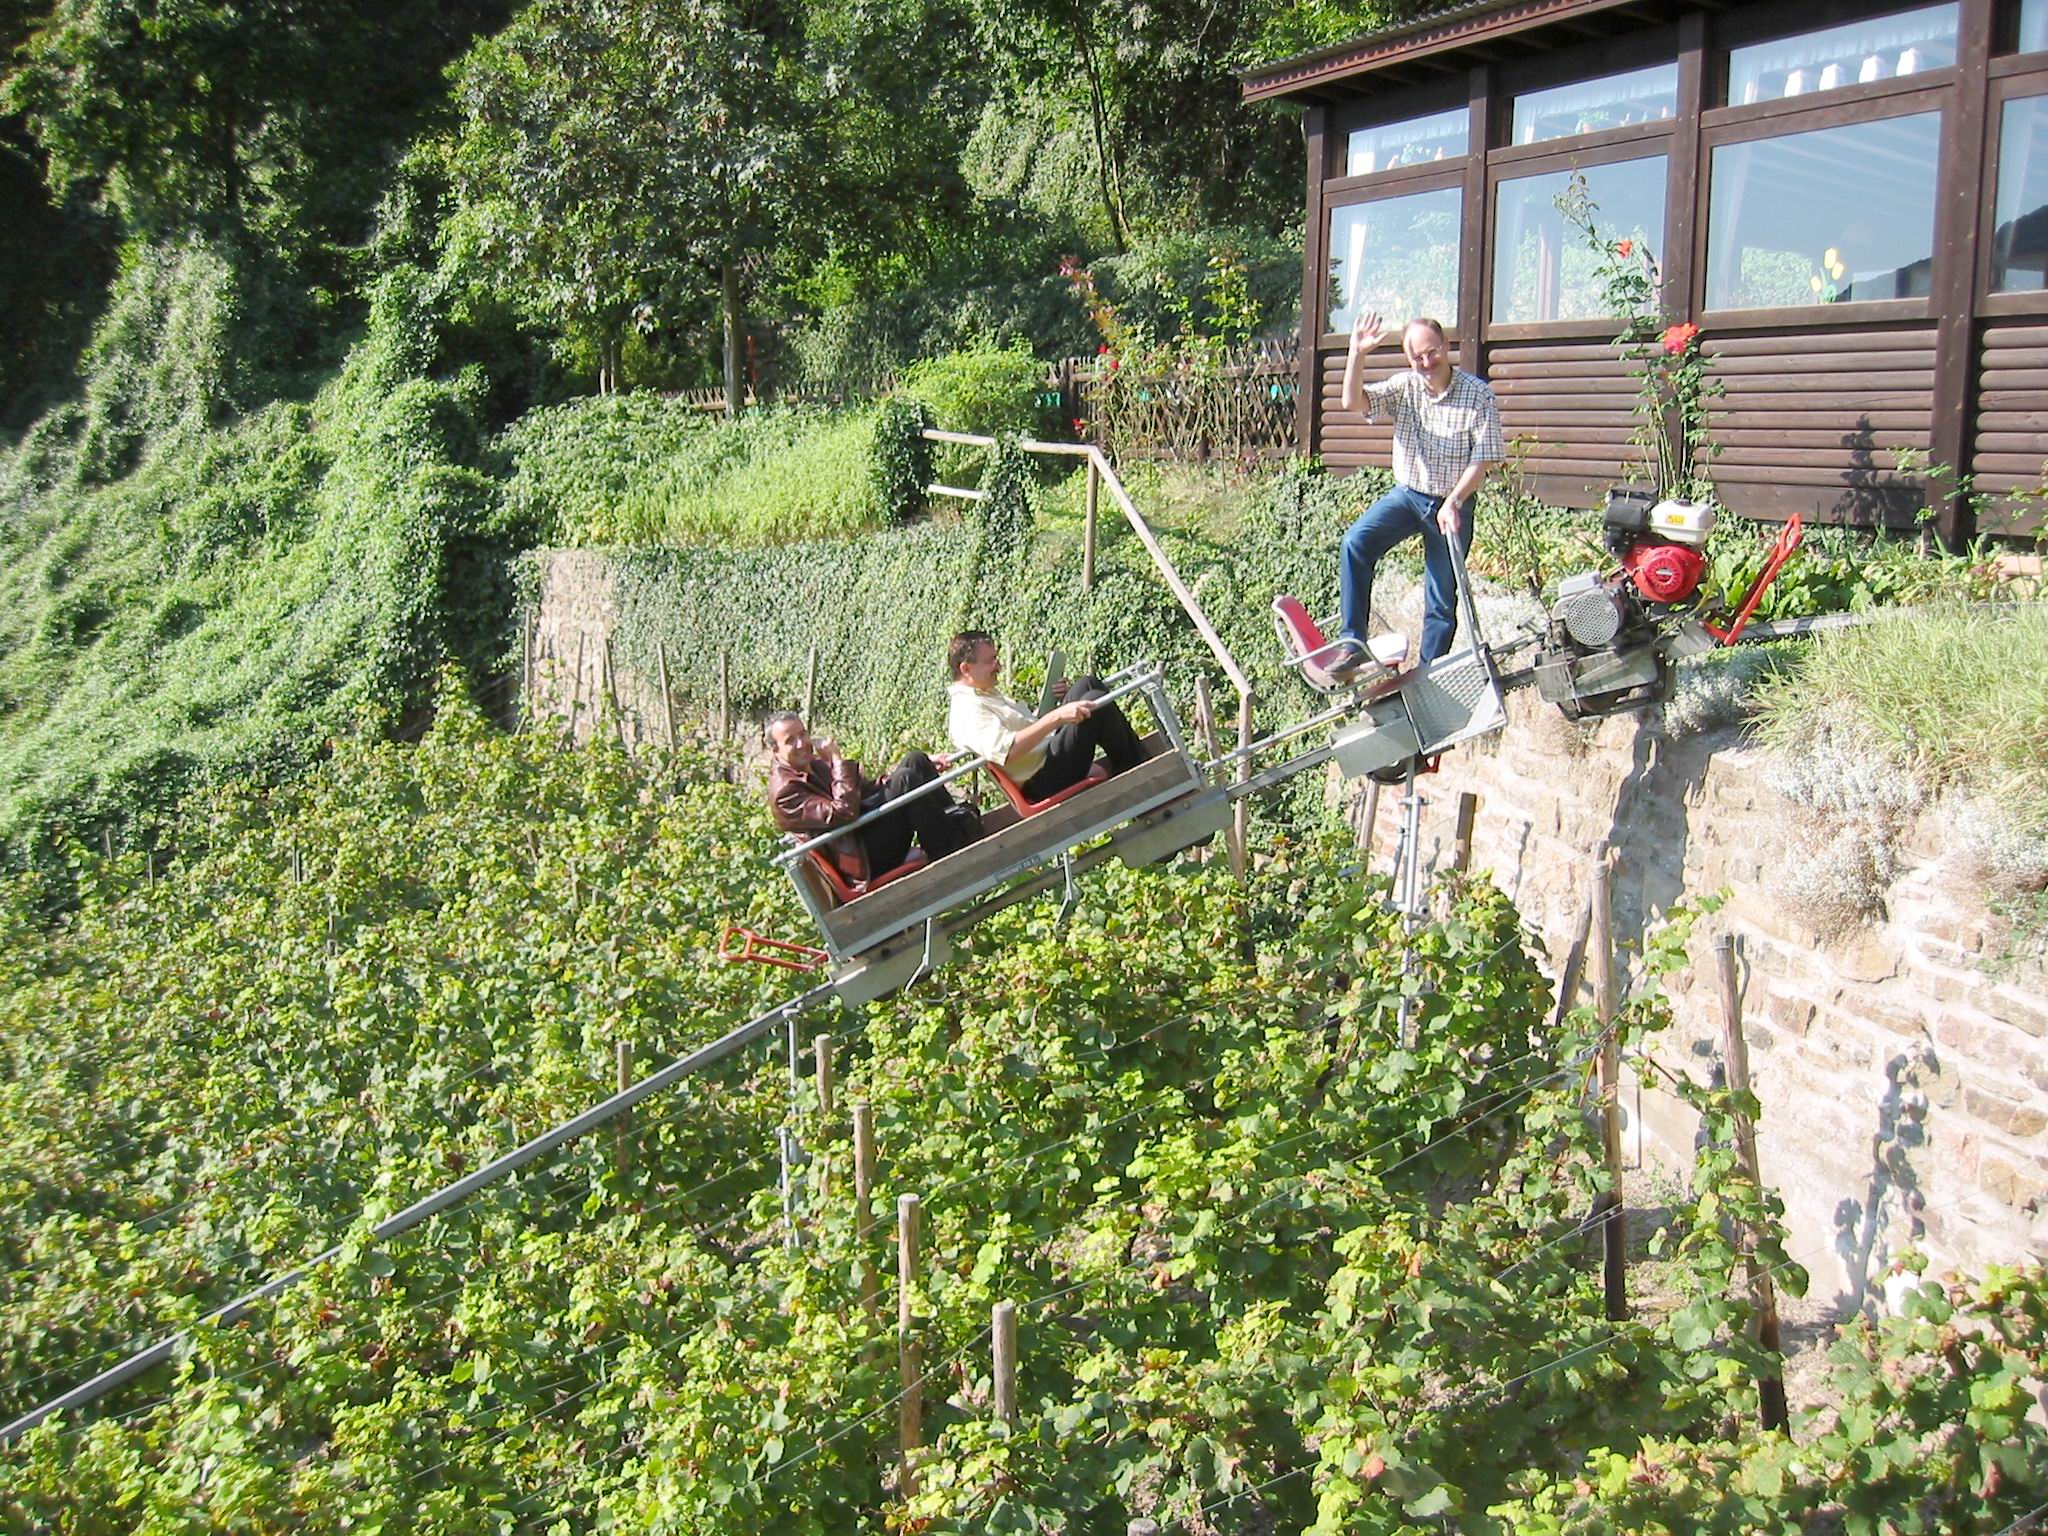 The vineyards there make use of a small trolley to navigate the hill, how fun!